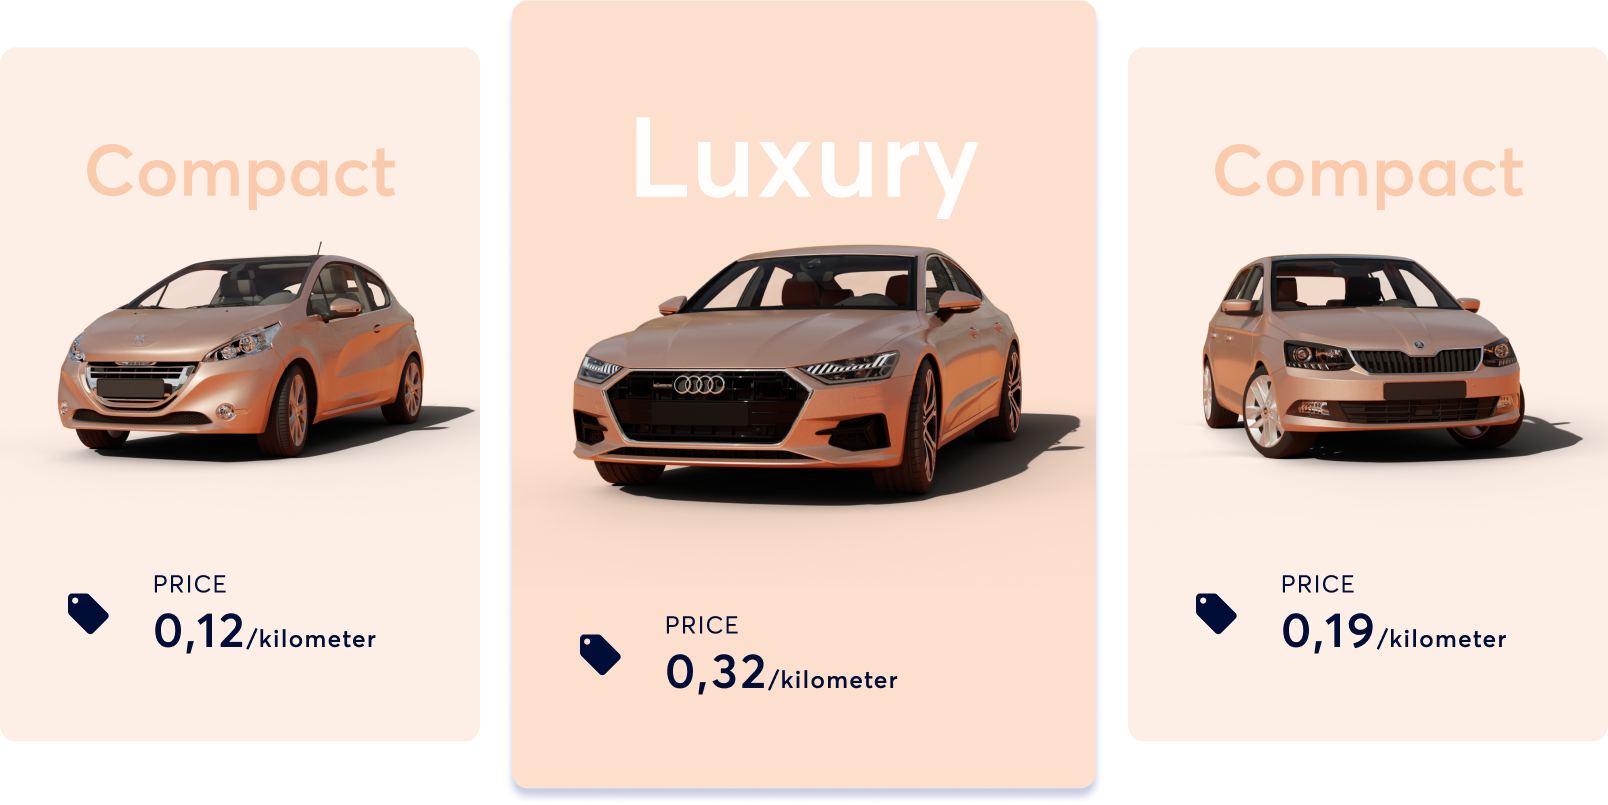 Graphic of orange car renders displaying different prices per kilometer, from compact to luxury options.